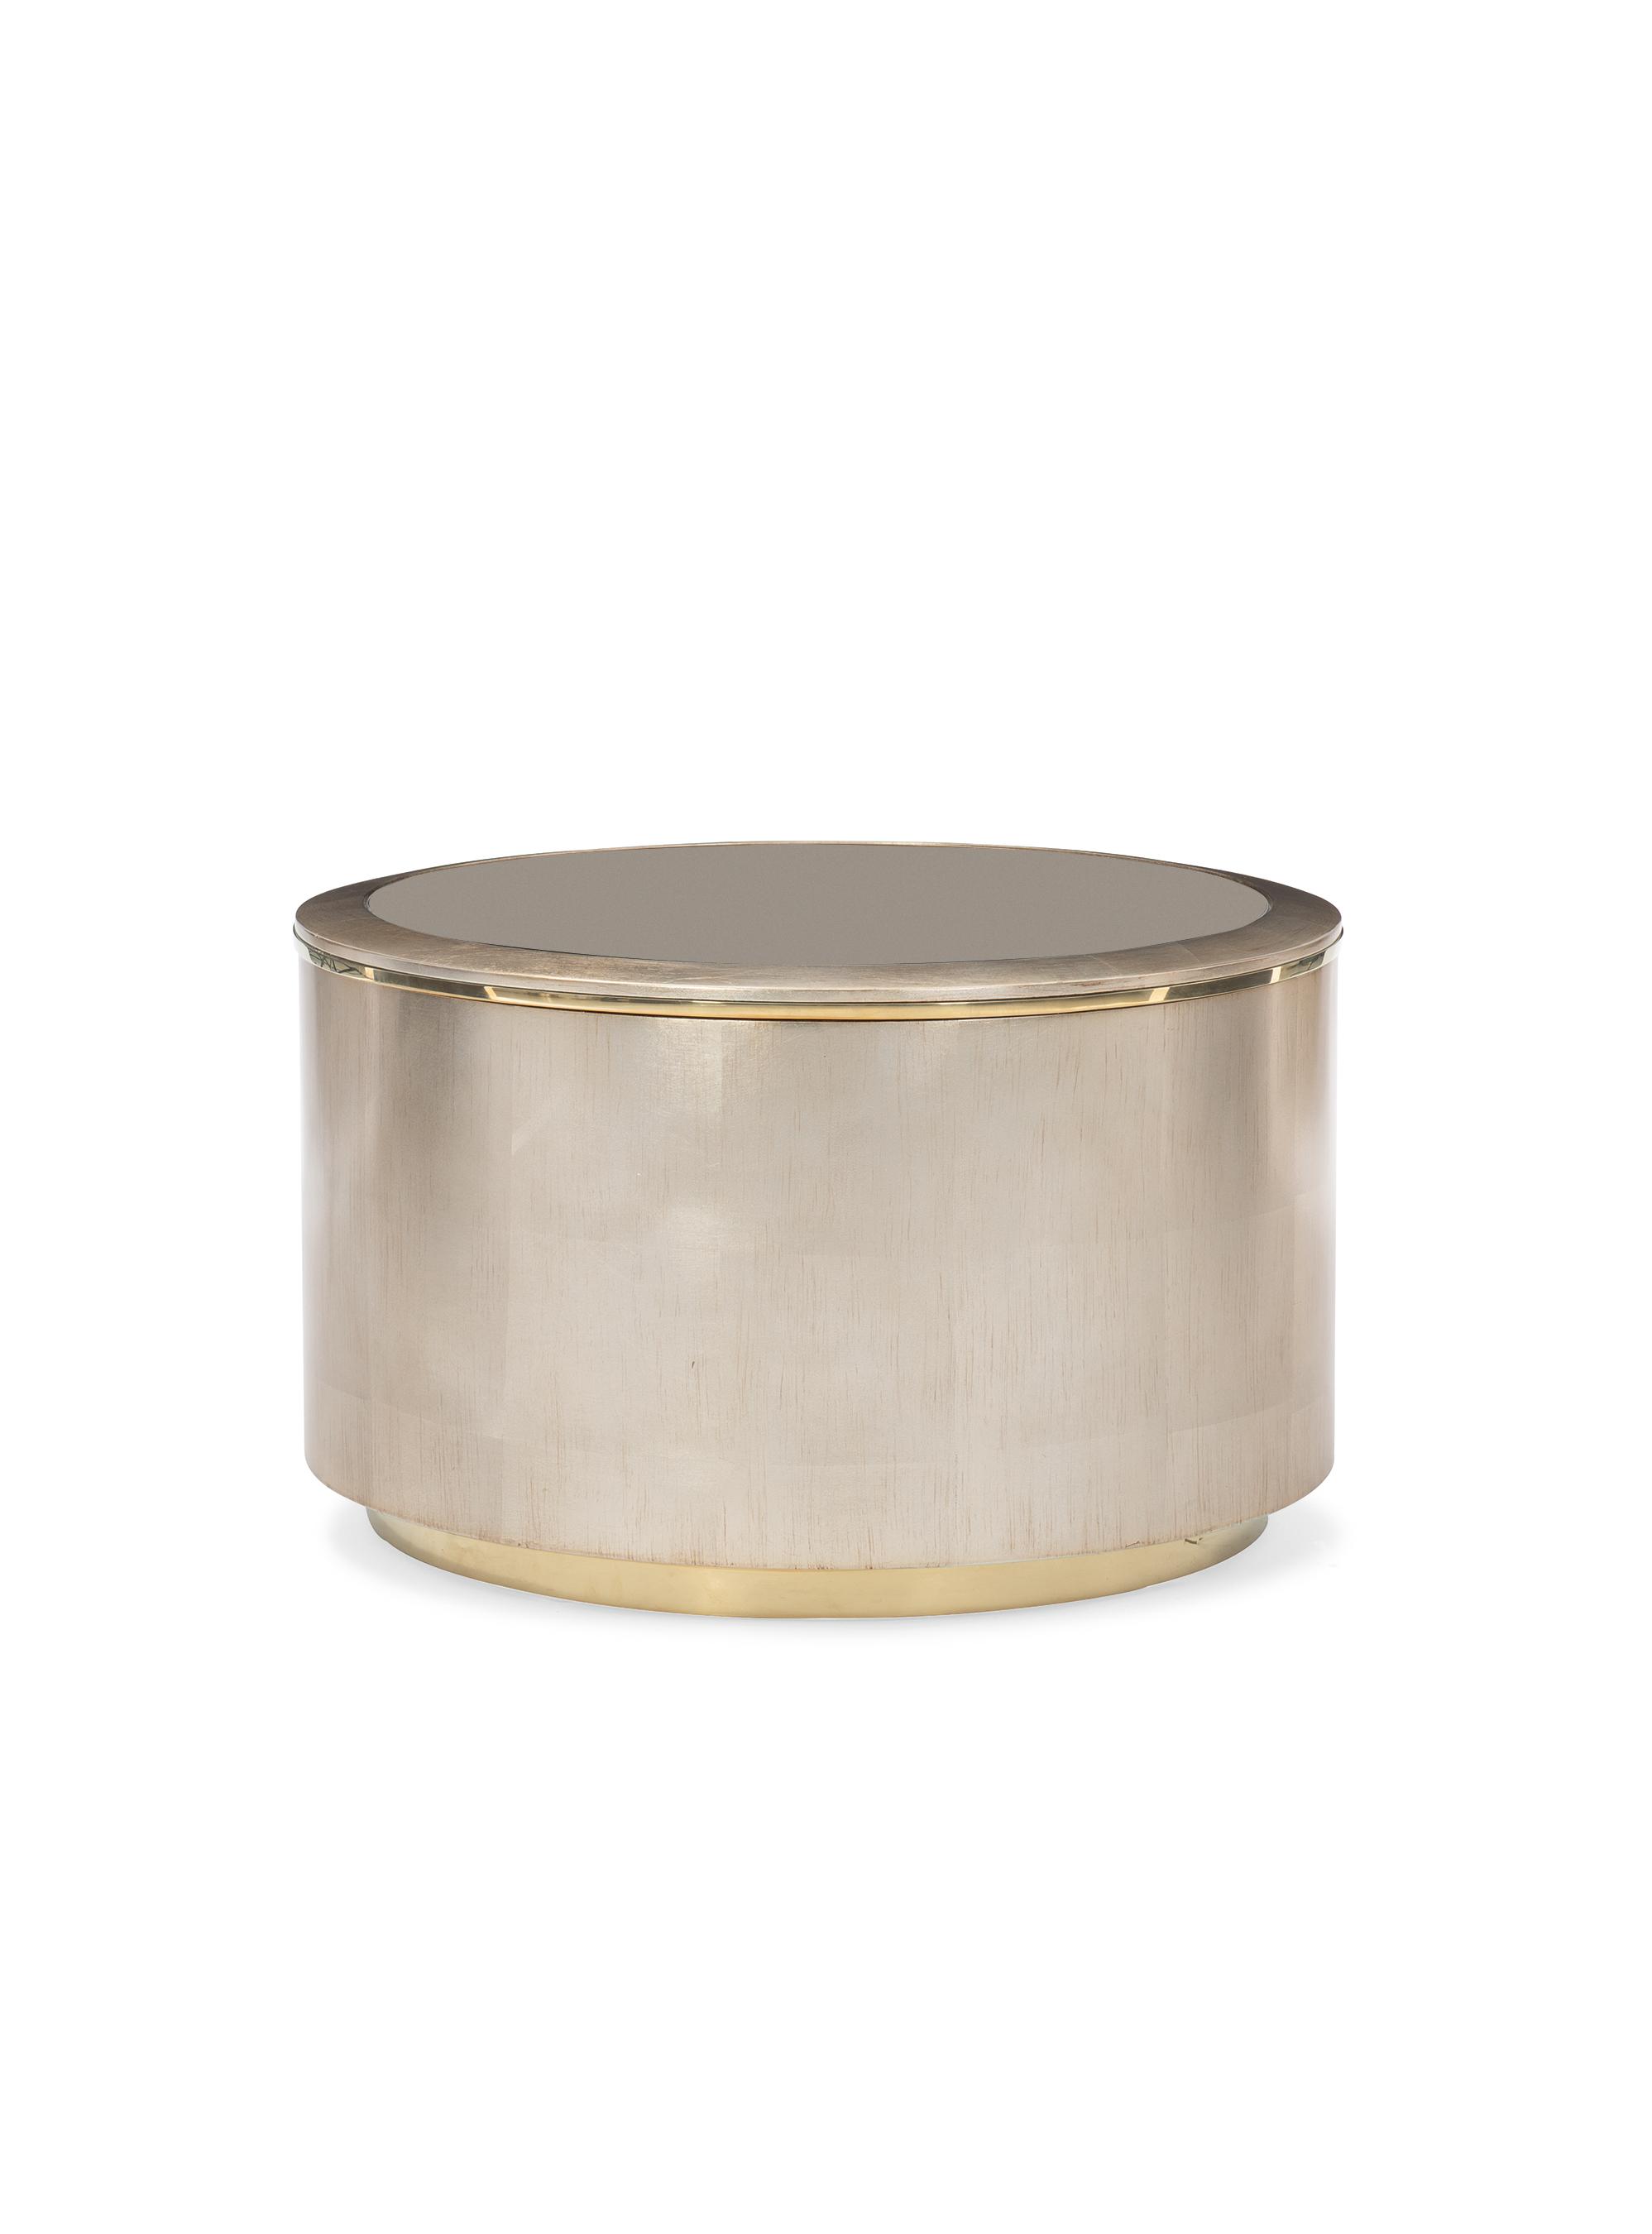 Contemporary Coffee Table CIRCLE IN TIME CLA-419-402 in Gold 